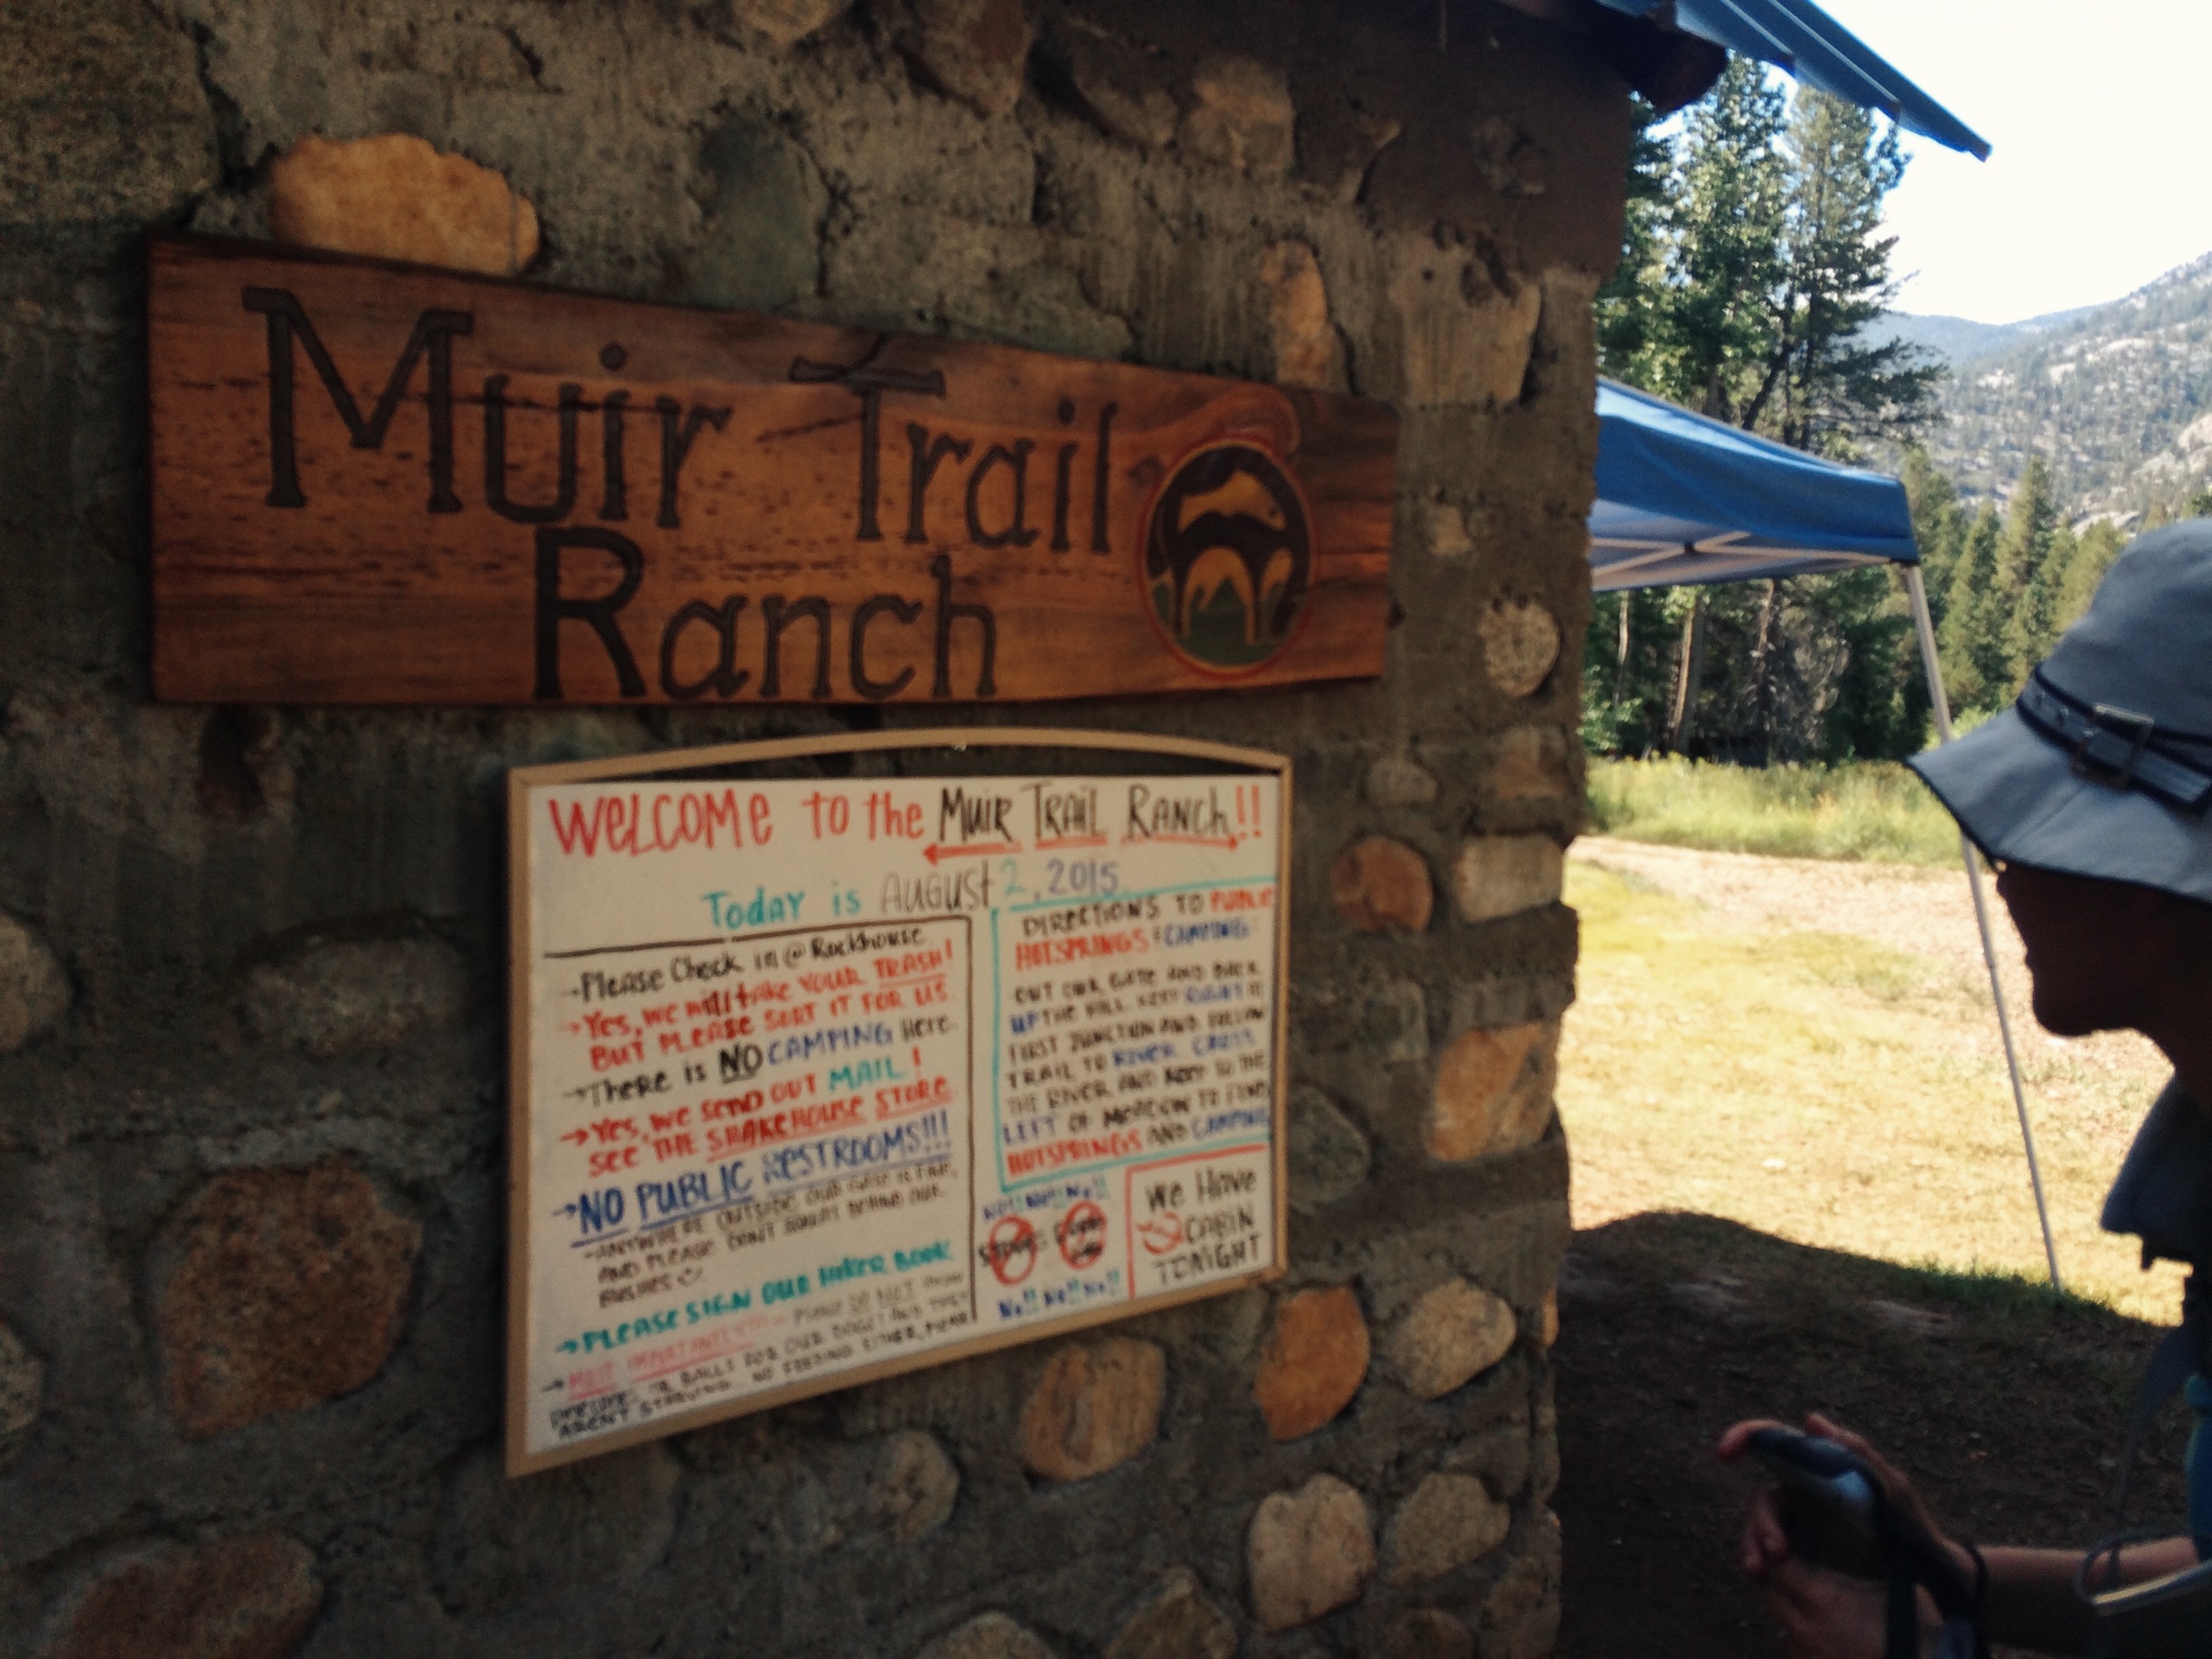  On our longest day on the trail we covered over 15 miles to make it to Muir Trail Ranch to pick up our resupply bucket before they closed for the day. 